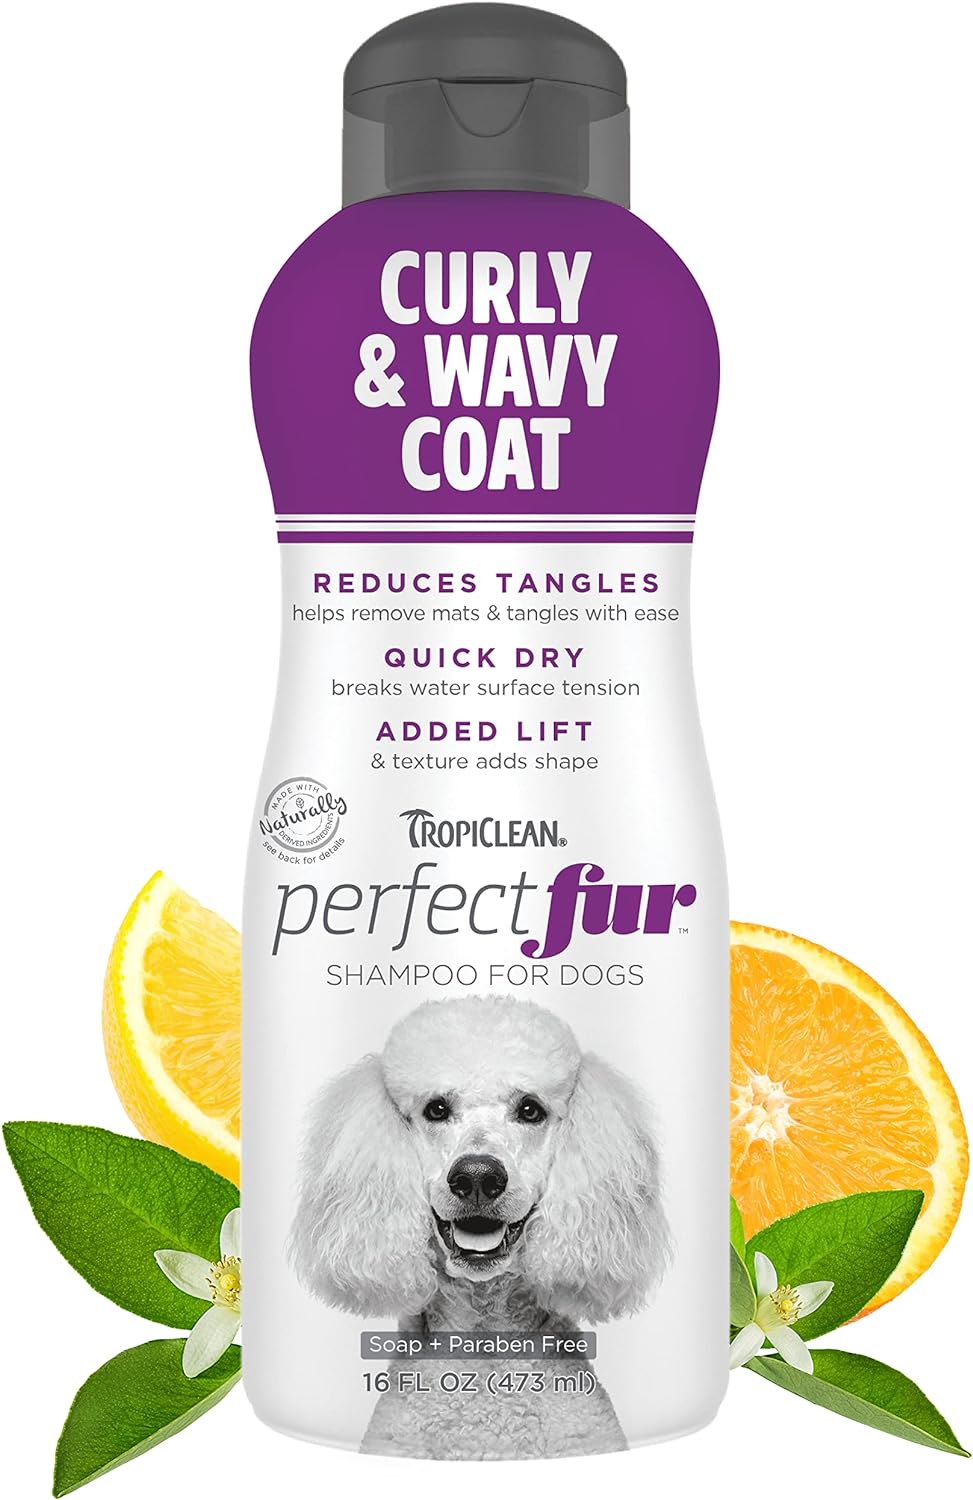 TropiClean PerfectFur Dog Shampoo - Used by Groomers - Derived from Natural Ingredients - Detangling & Dematting Formula for Curly & Wavy Coat, Thick Fur & Wiry Breeds like Poodles & Bichons - 473ml?PFCWSH16Z